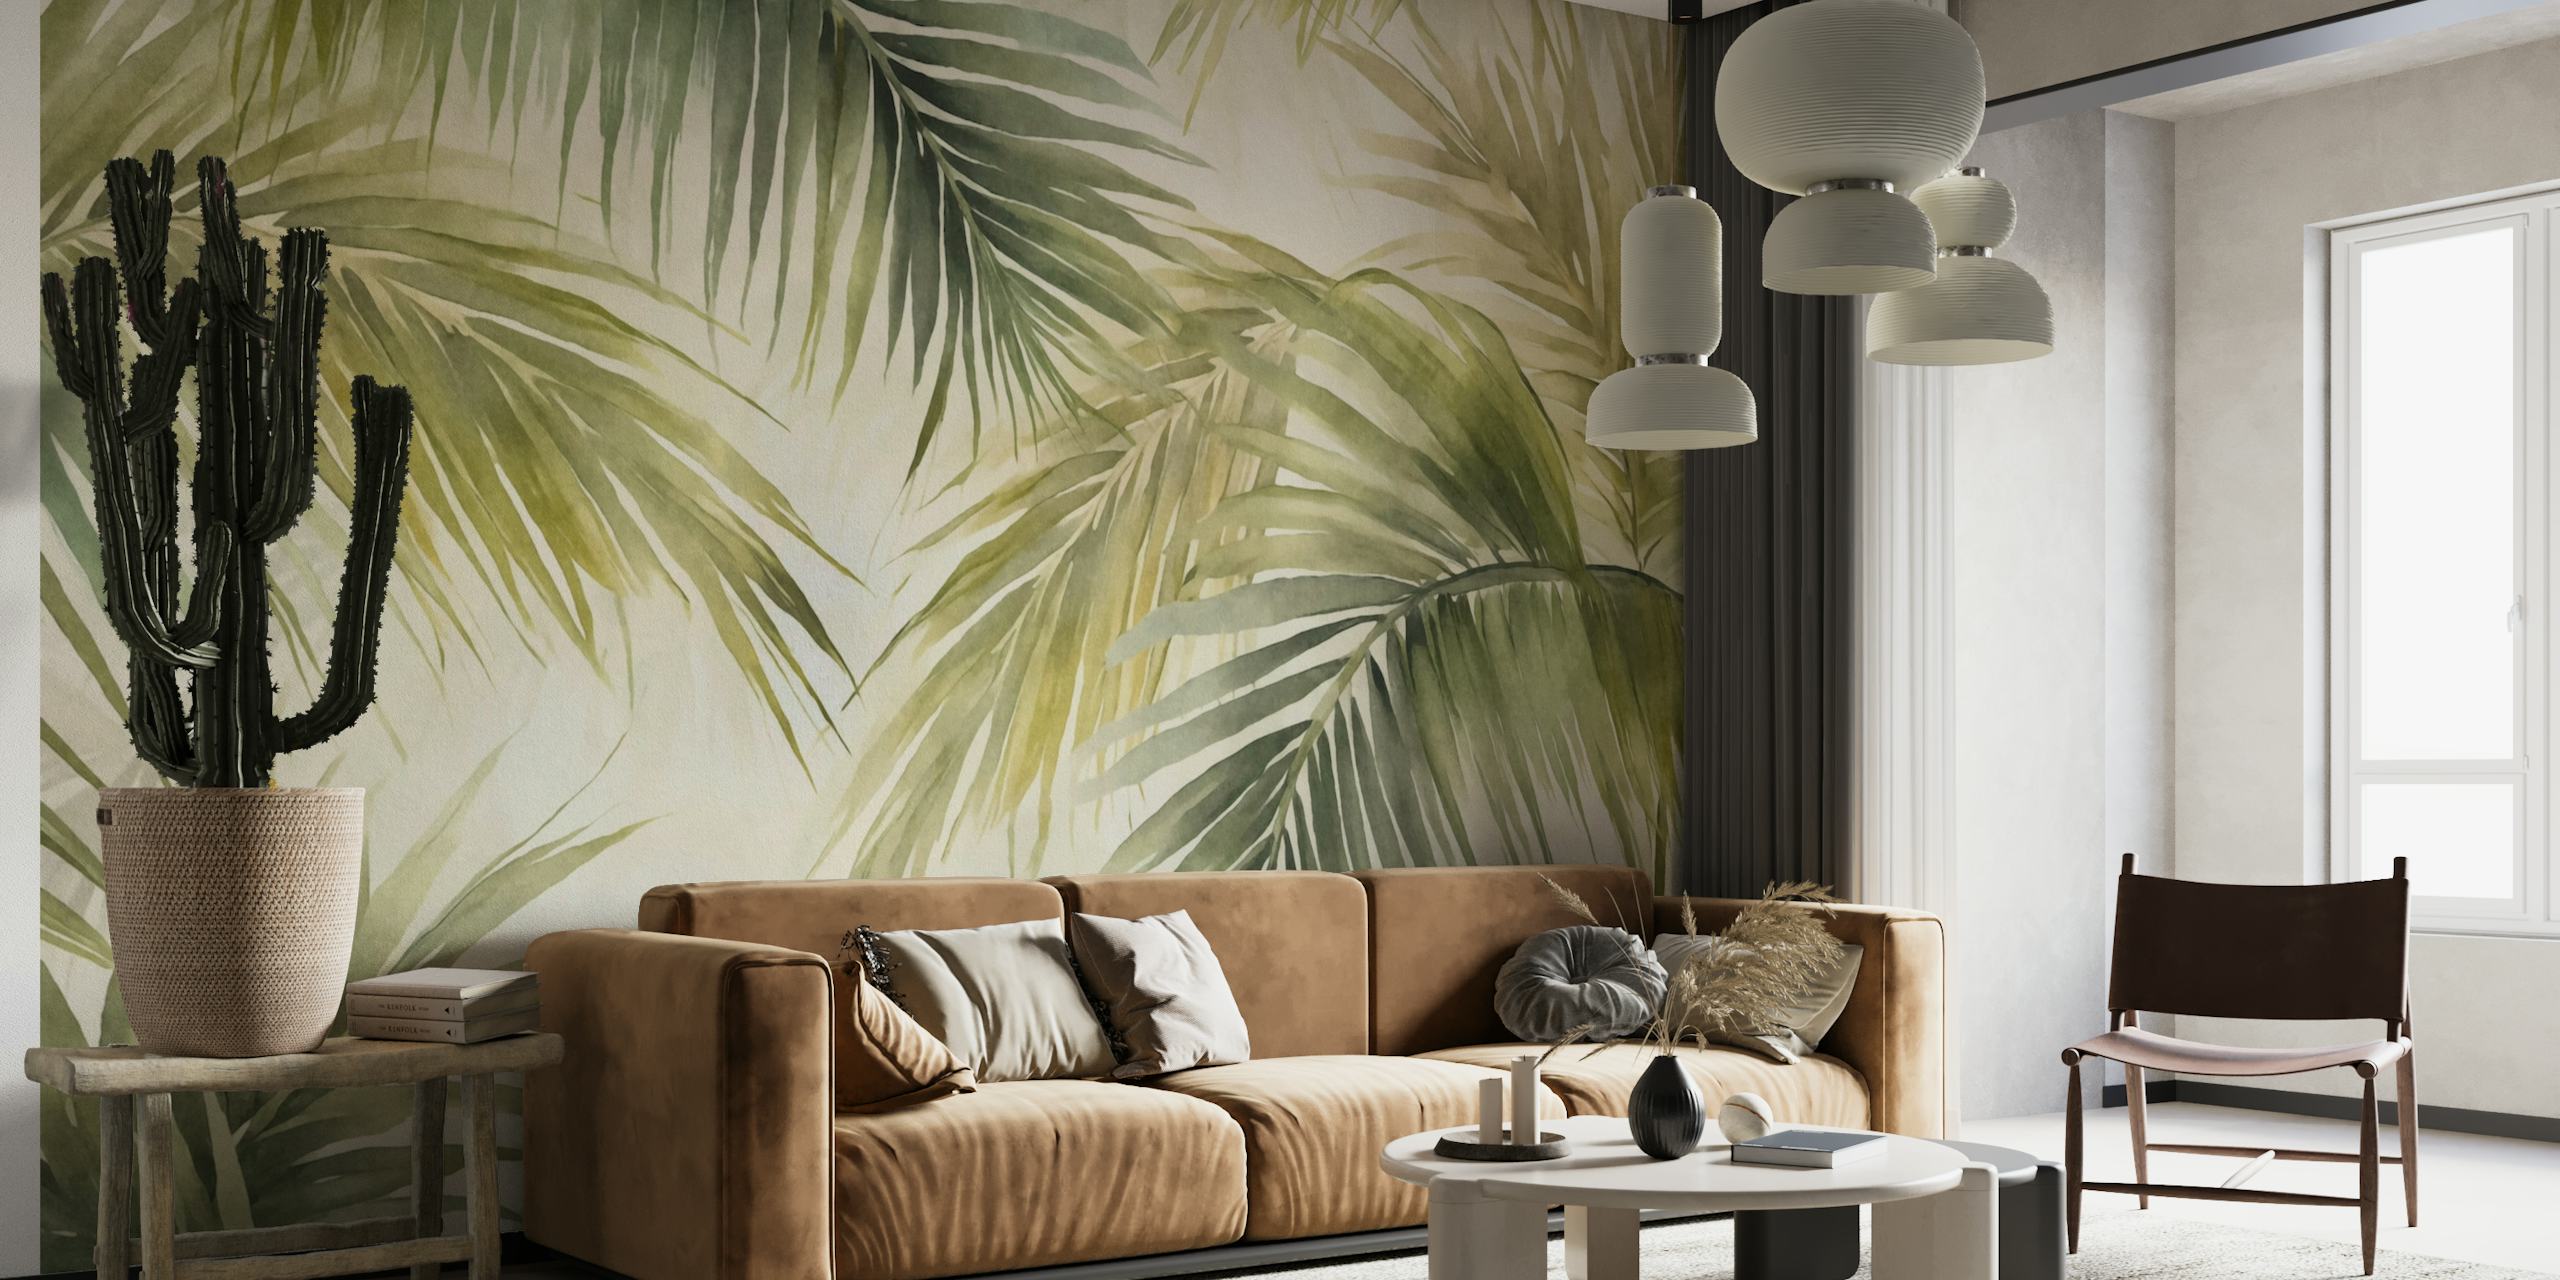 Tropical Island Palm Leaves Watercolor Green wall mural with lush greenery